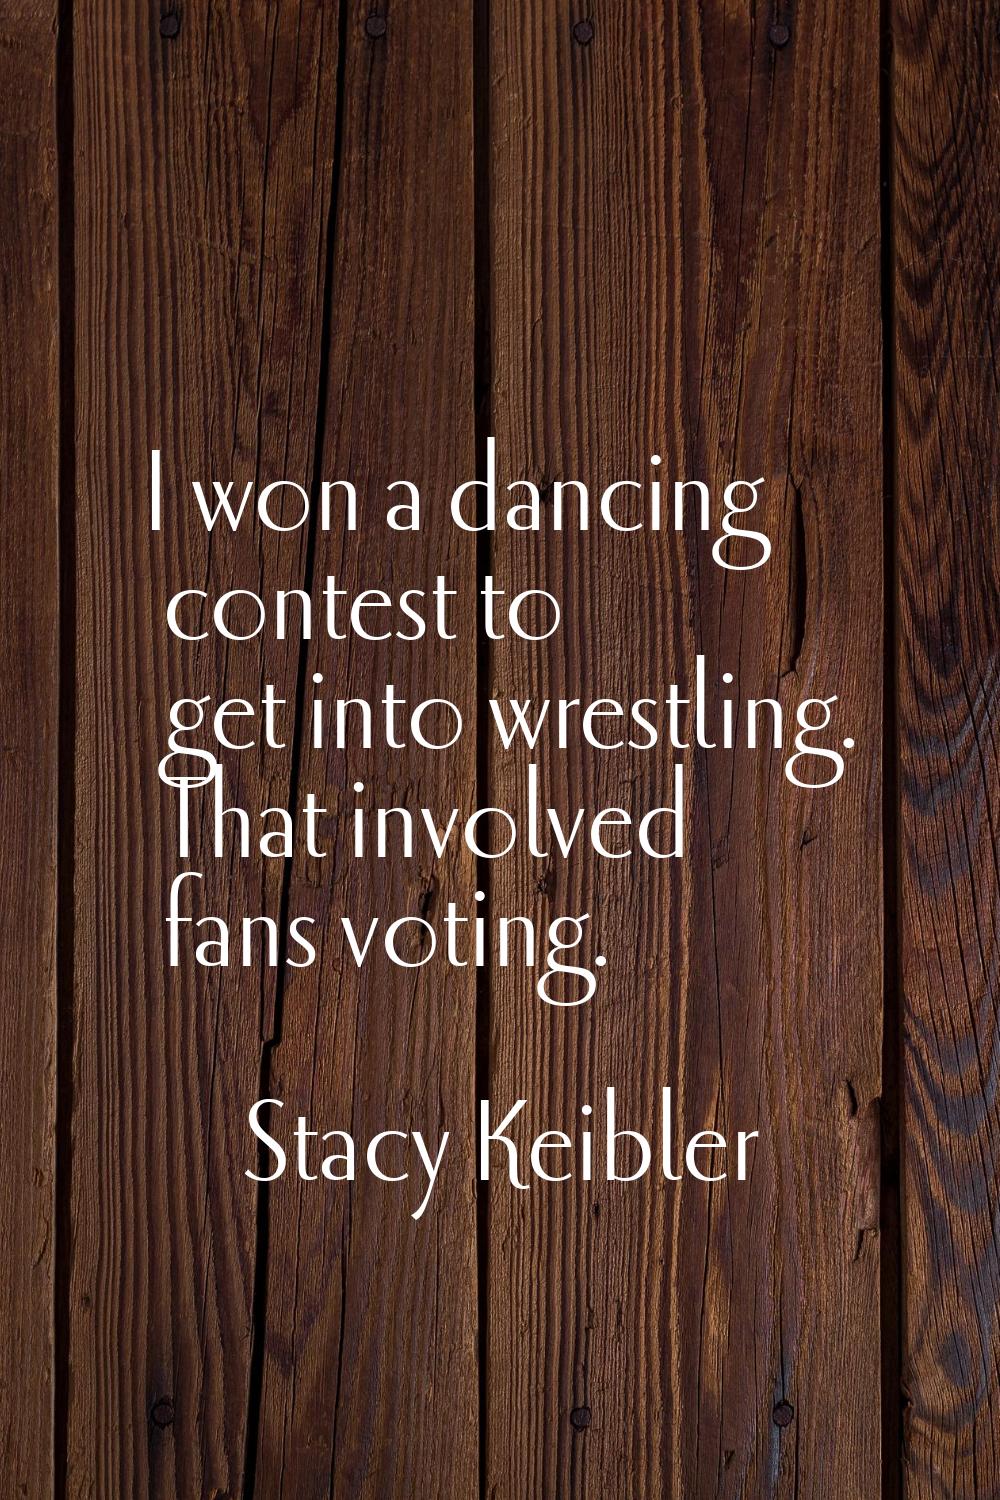 I won a dancing contest to get into wrestling. That involved fans voting.